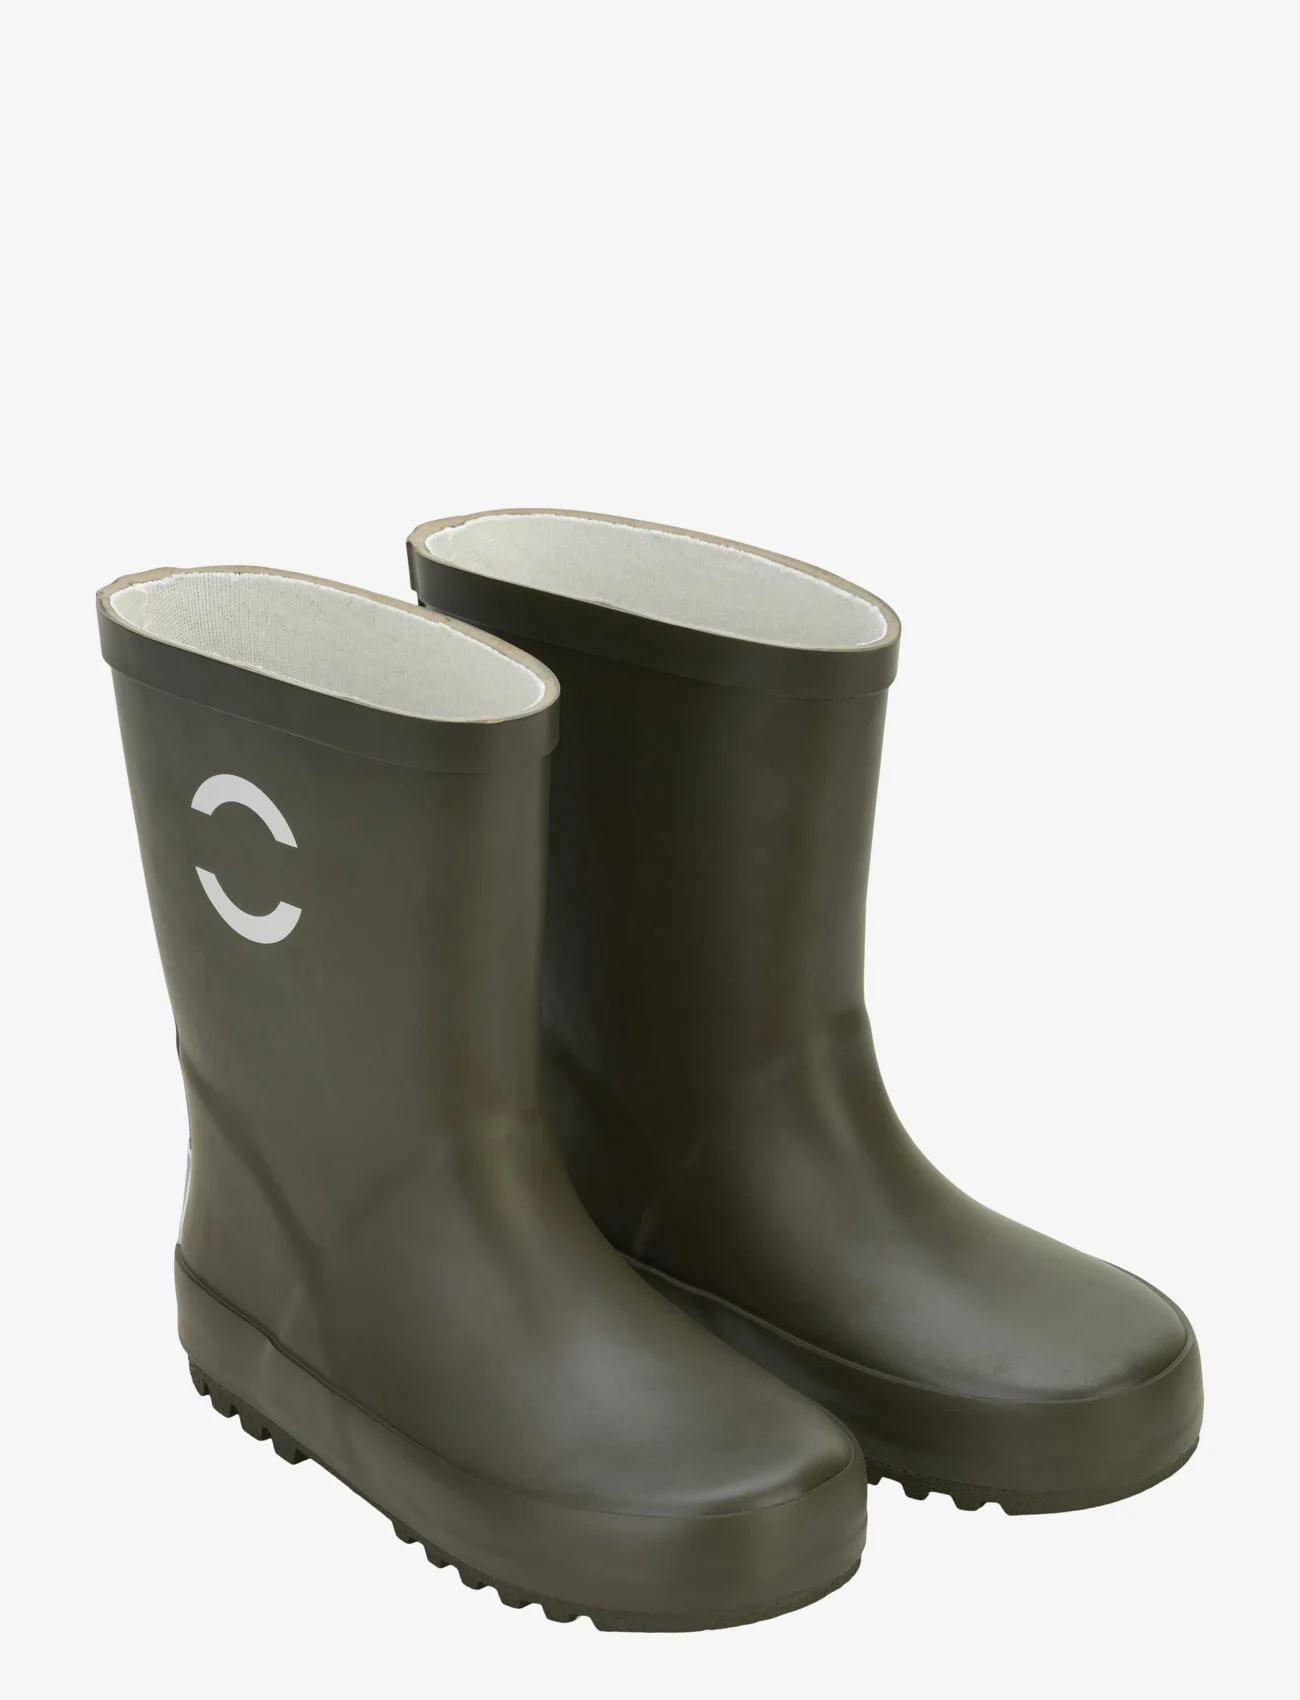 mikk-line - Wellies - Solid - unlined rubberboots - dusty olive - 0